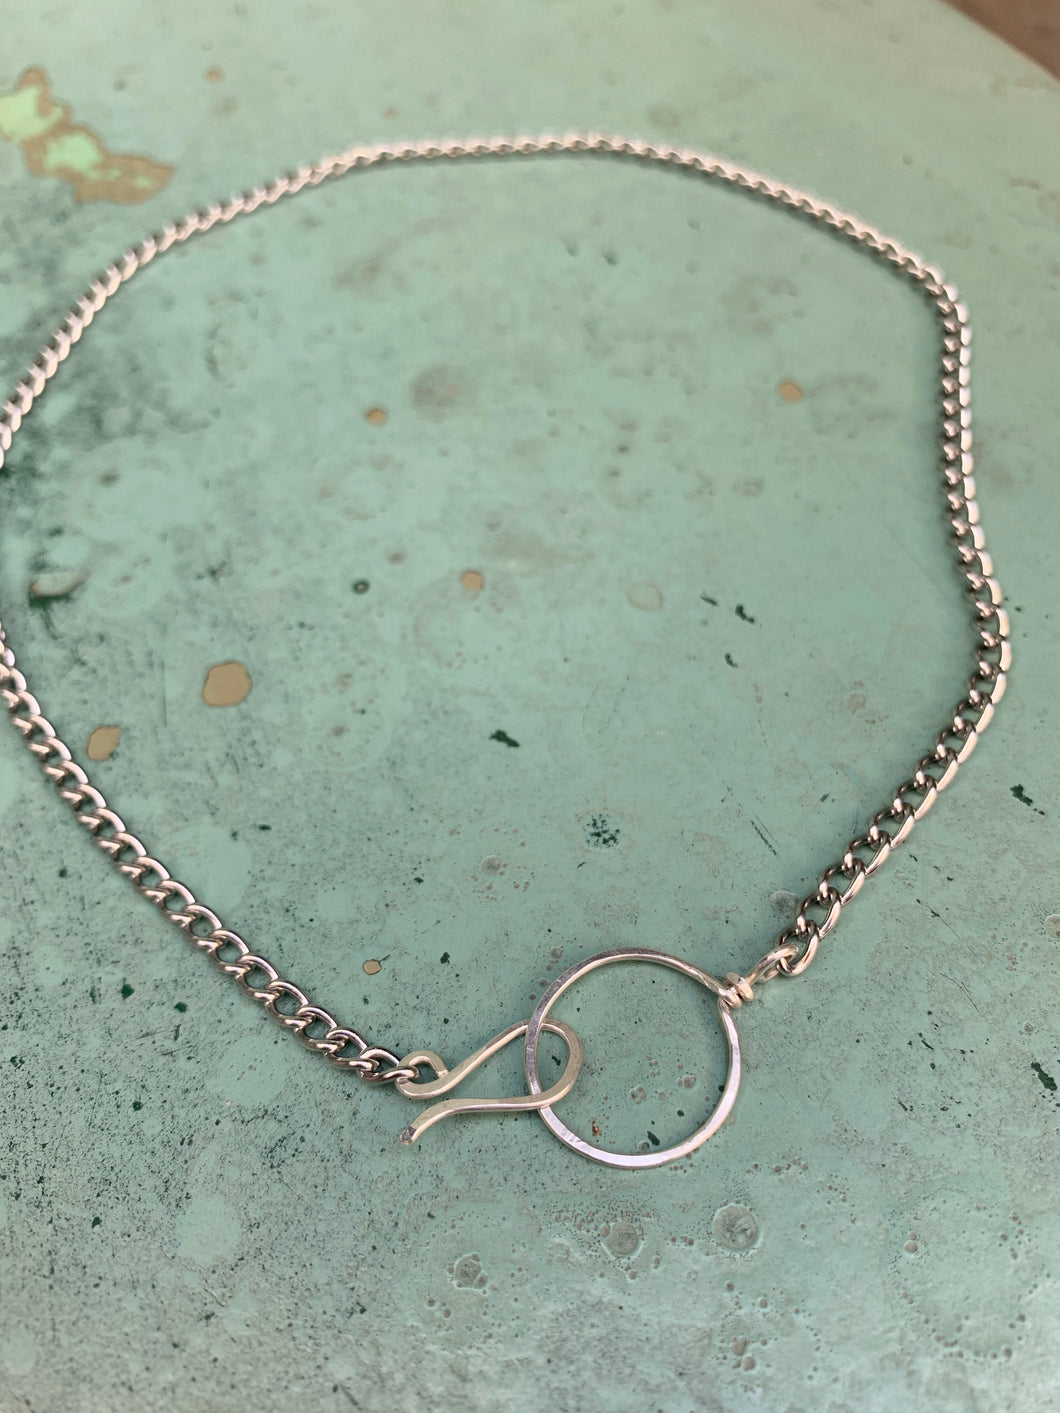 Silver or gold ring necklace